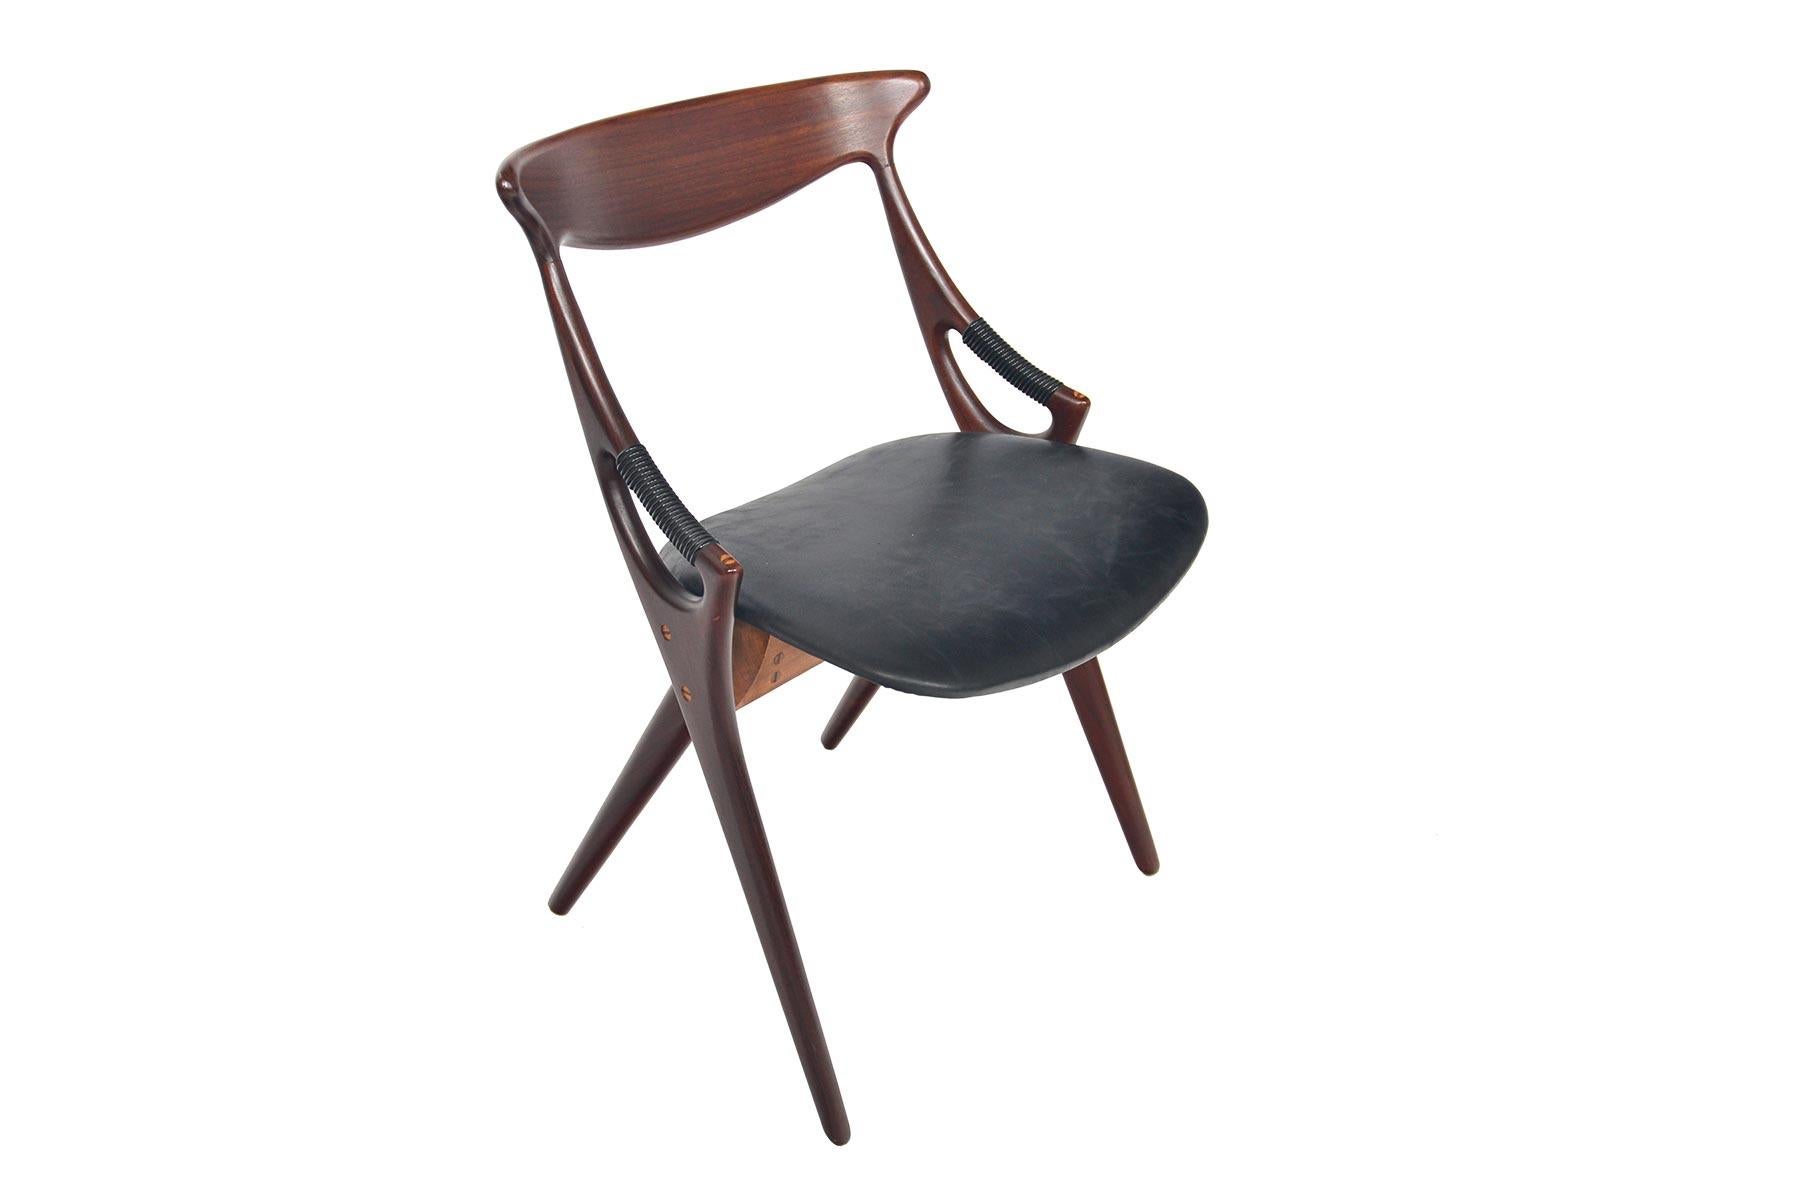 This stunning Danish modern dining chair was designed by Arne Hovmand Olsen for Mogens Kold in 1959 as model 71. Beautifully sculpted, the frame offers continuous joinery extending from the backrest to the scissored leg design. Plastic wrapped